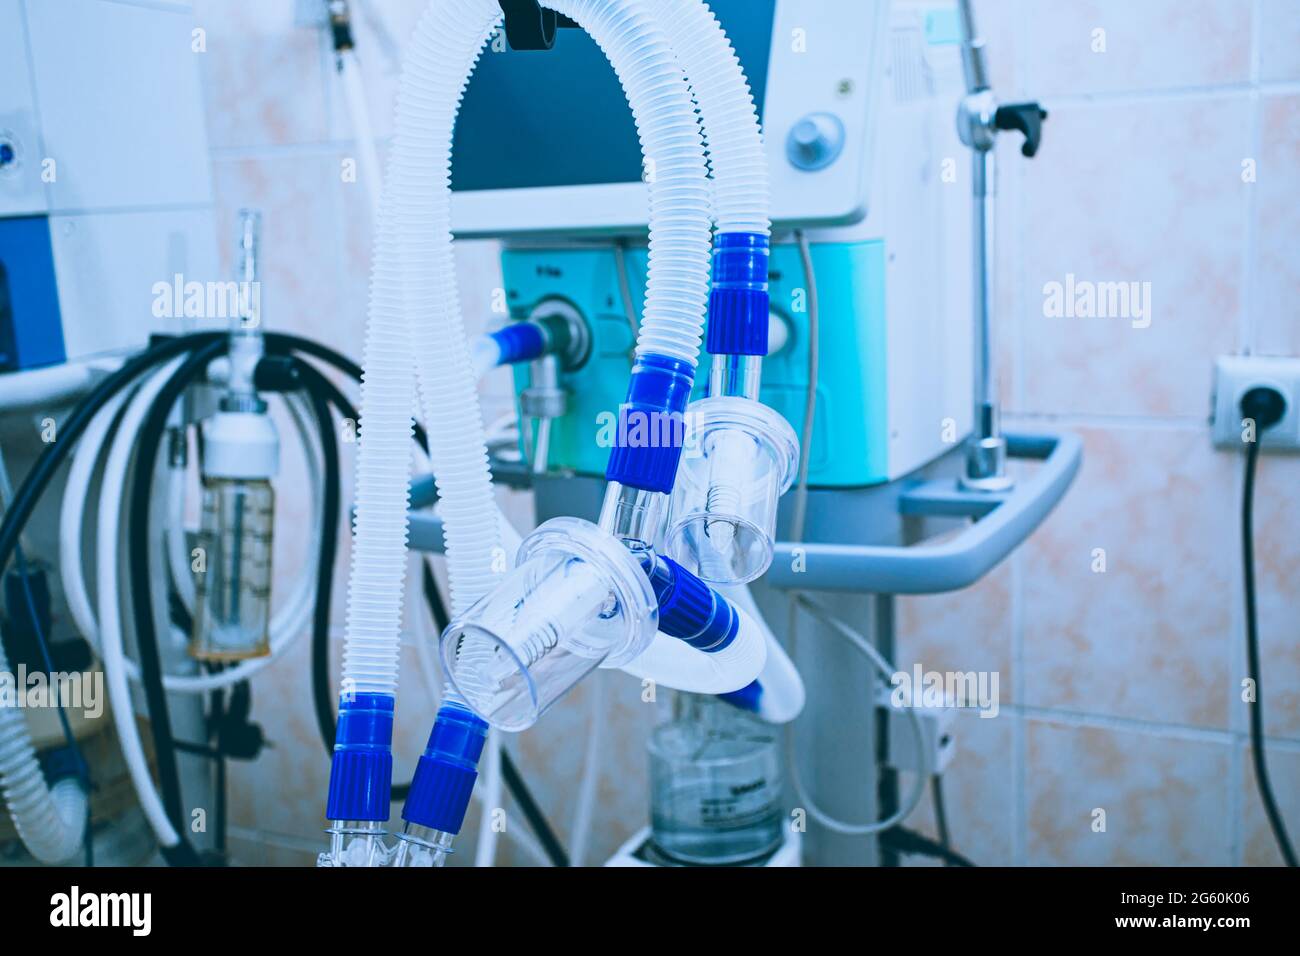 Components of medical device for ventilating lungs in hospital Stock Photo